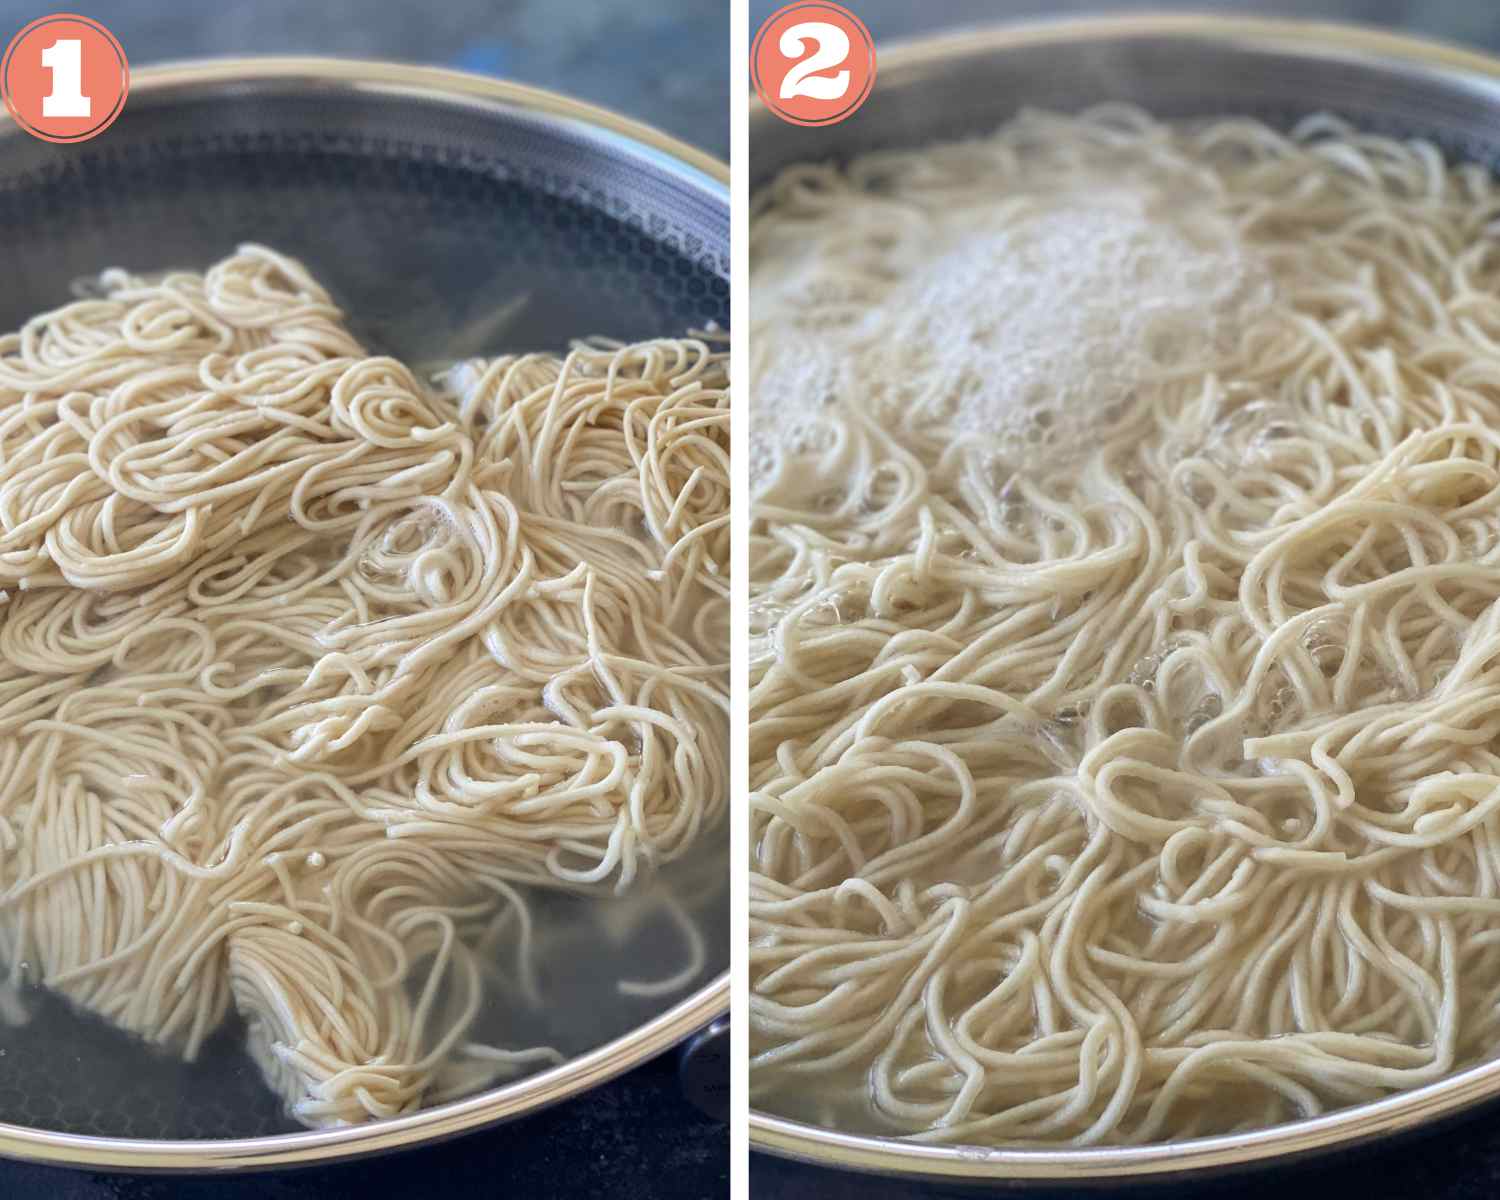 Collage steps to make Schezwan noodles; adding noodles and salt to boiling water. 